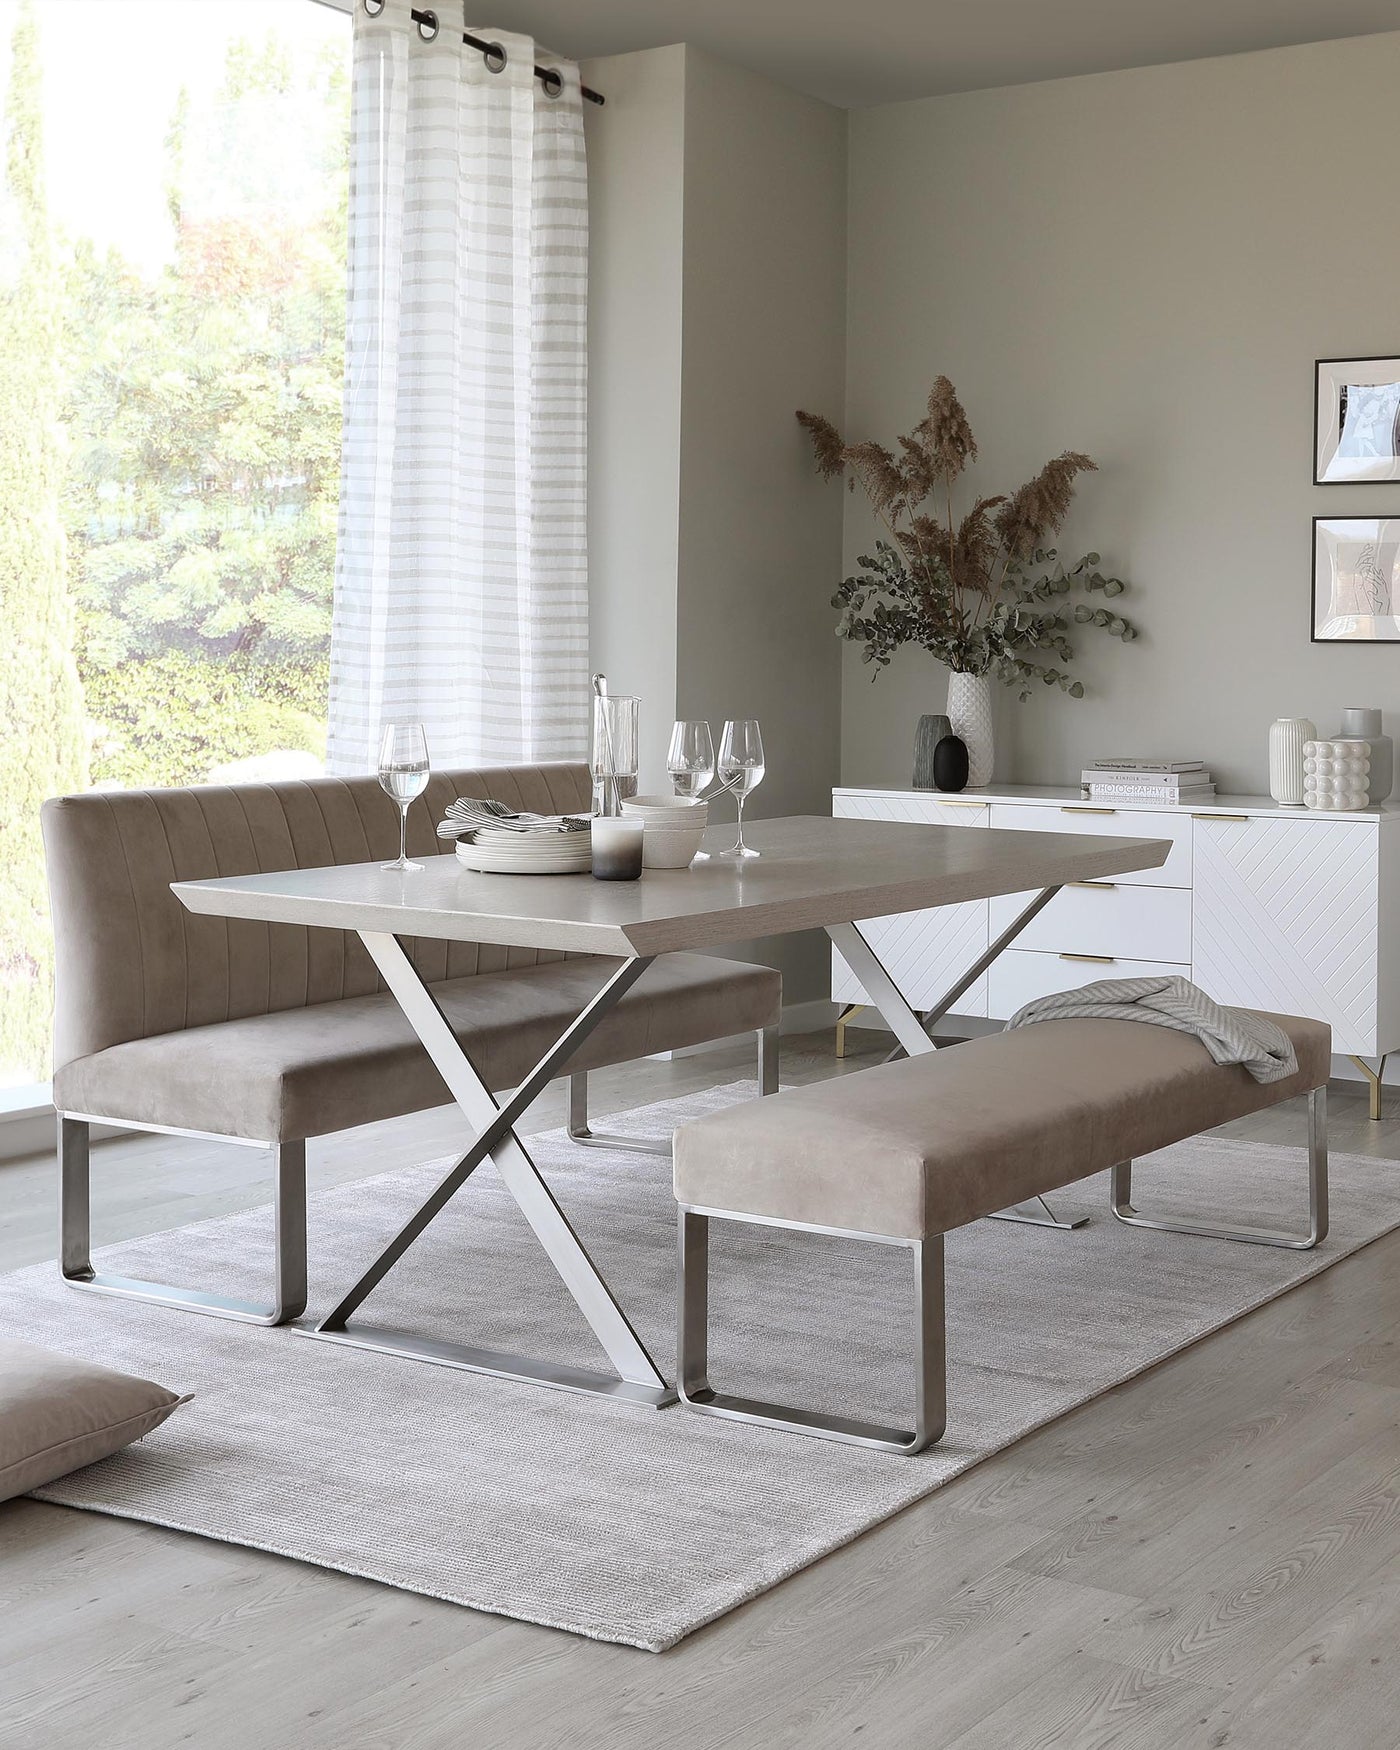 Modern dining room furniture set including a rectangular table with a white marble top and distinctive crisscross silver metal legs. Accompanying the table is a taupe upholstered L-shaped bench and a matching bench, both with sleek silver metal frames. The set is arranged on a light grey area rug on a wooden floor, with a minimalist sideboard and decor in the background.